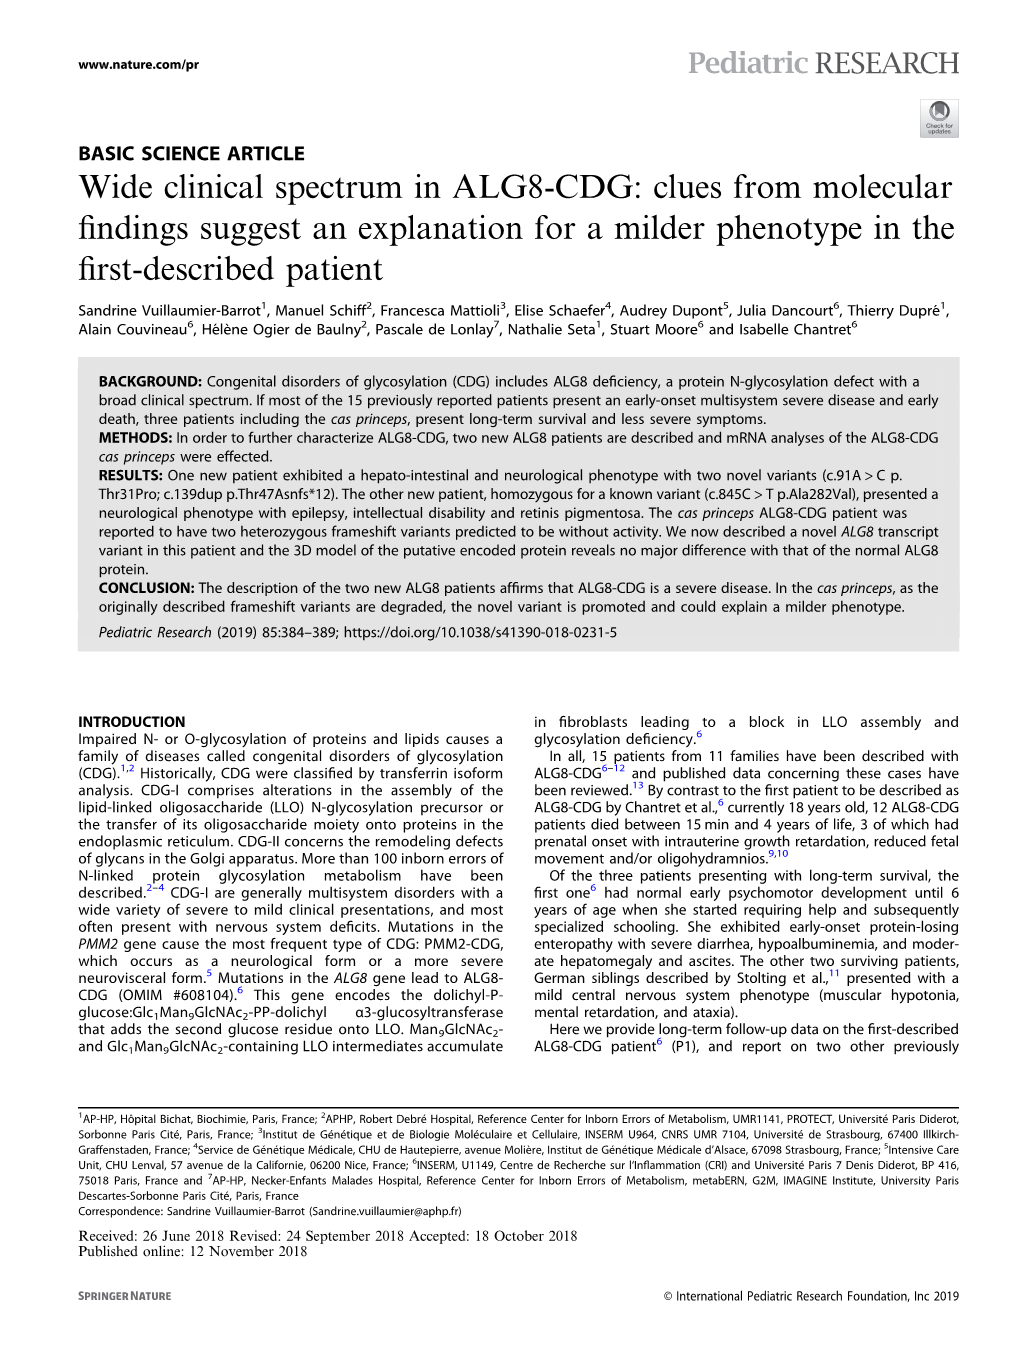 Wide Clinical Spectrum in ALG8-CDG: Clues from Molecular ﬁndings Suggest an Explanation for a Milder Phenotype in the ﬁrst-Described Patient